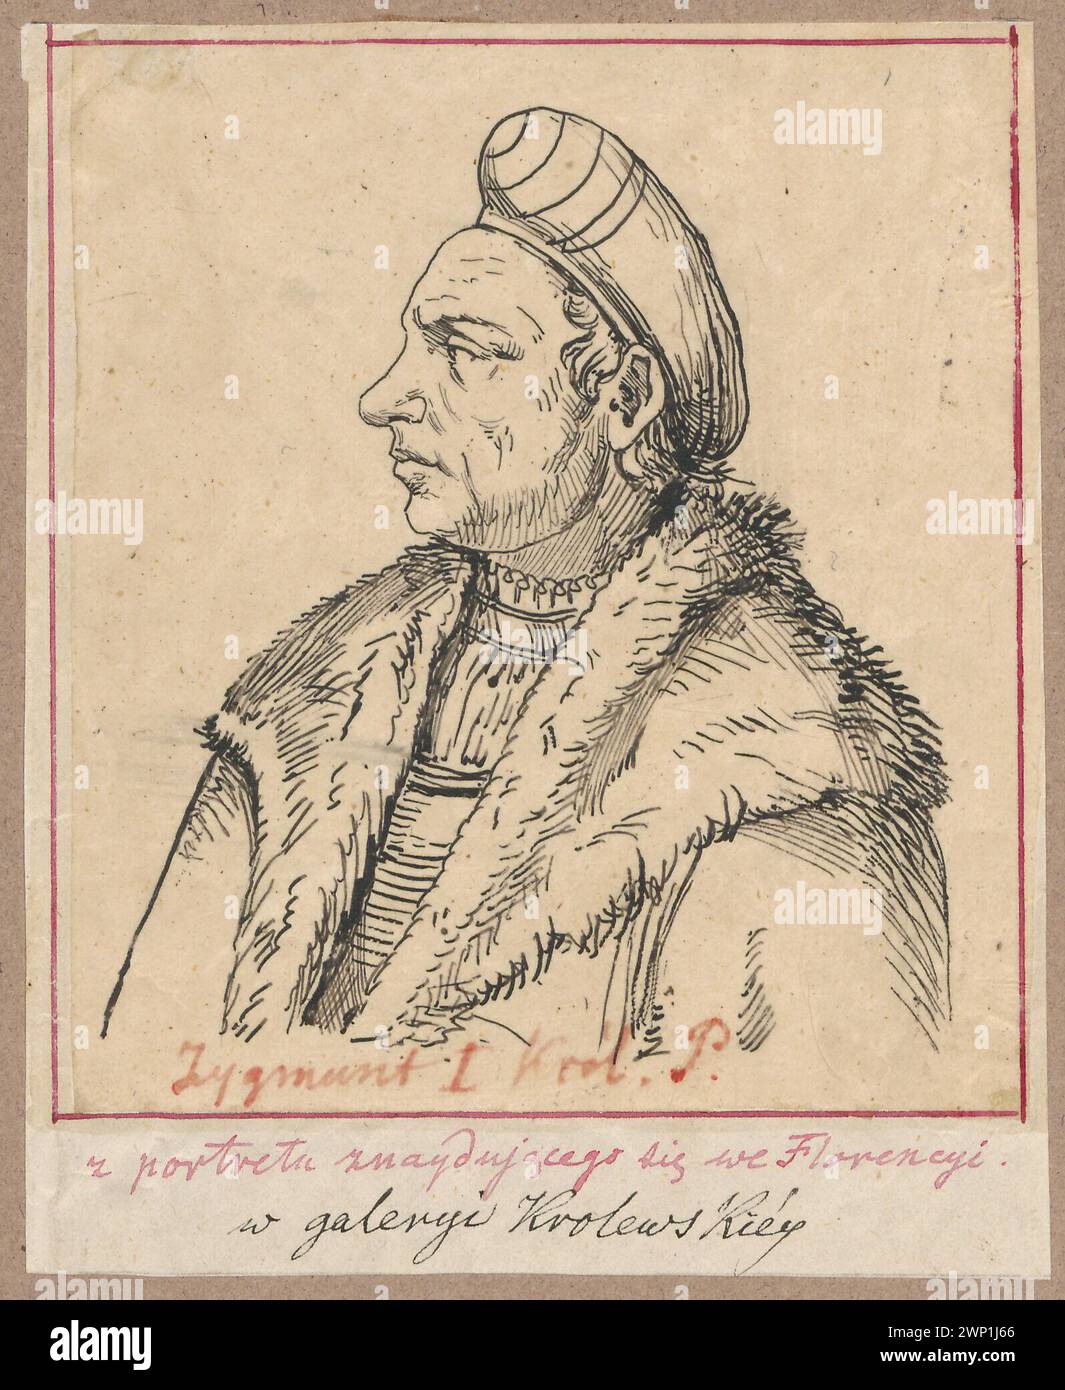 Portrait from the profile of King Zygmunt I Old, according to the portrait of in Galeria Królewska in Florence; Lesser, Aleksander (1814-1884); 1830-1884 (1830-00-00-1884-00-00);Florence (Italy), Galeria Królewska (Florence - Italy), Lesser, Aleksander (1814-1884), Lesser, Aleksander (1814-1884) - collections, Lesser, Lesser, Wiktor Stanisław Zygmunt (Baron - 1853-1935), Lesser, Wiktor Stanisław Zygmunt (Baron - 1853-1935) - collection, 16th century, Zygmunt Stary (Polish King - 1467-1548), Zygmunt Stary (King of Poland - 1467-1548) - iconography, gift (provenance), kopies, kings, personalitie Stock Photo